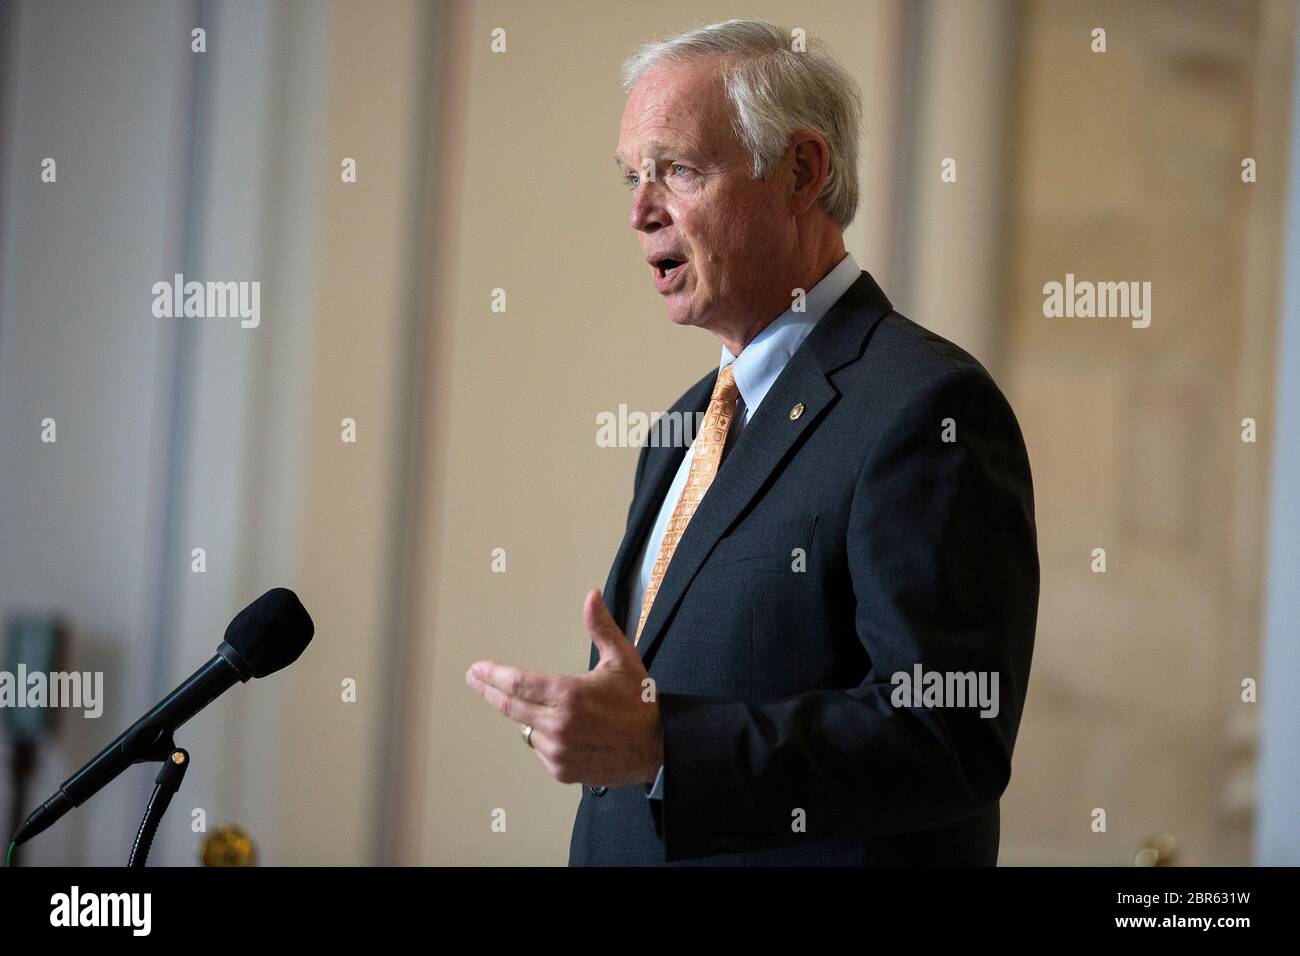 Washington, United States Of America. 20th May, 2020. United States Senator Ron Johnson (Republican of Wisconsin) speaks to members of the media prior to a U.S. Senate Committee on Homeland Security and Governmental Affairs meeting in the Senate Russell Office Building in Washington, DC, U.S., on Wednesday, May 20, 2020, as the committee considers a motion to issue a subpoena to Blue Star Strategies. Credit: Stefani Reynolds/CNP Photo via Credit: Newscom/Alamy Live News Stock Photo